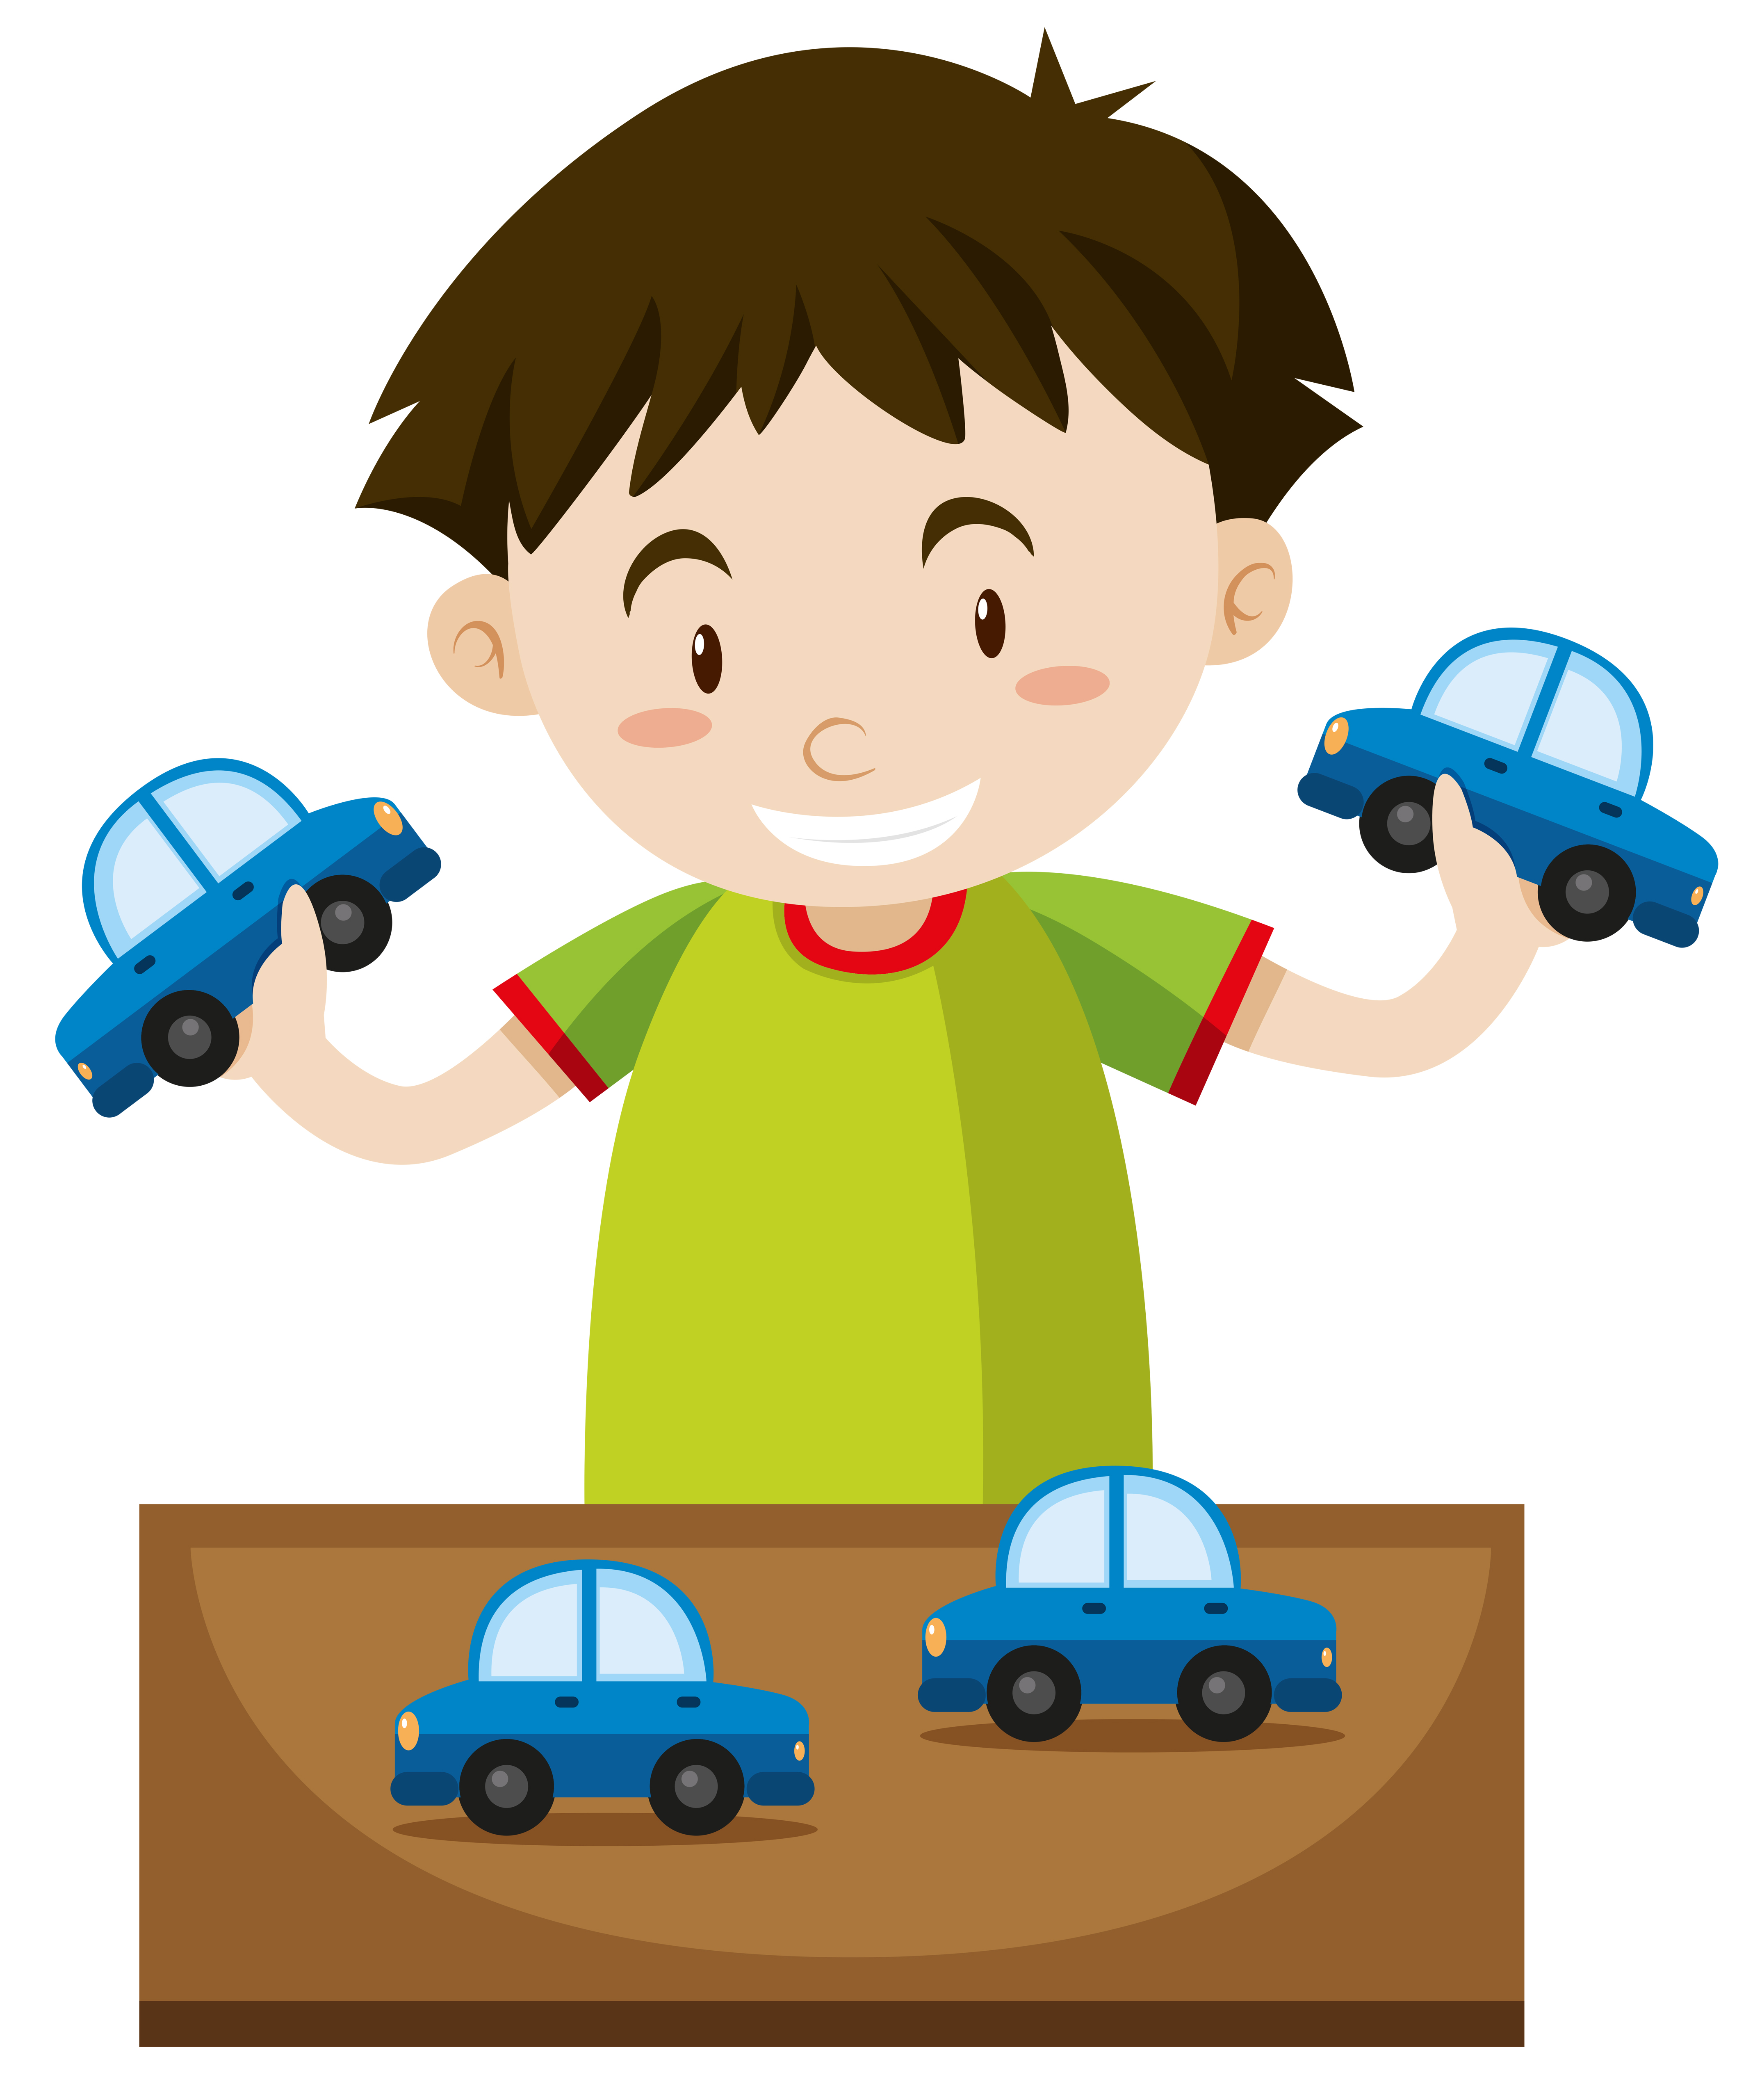 Little boy playing with toy cars - Download Free Vectors ...